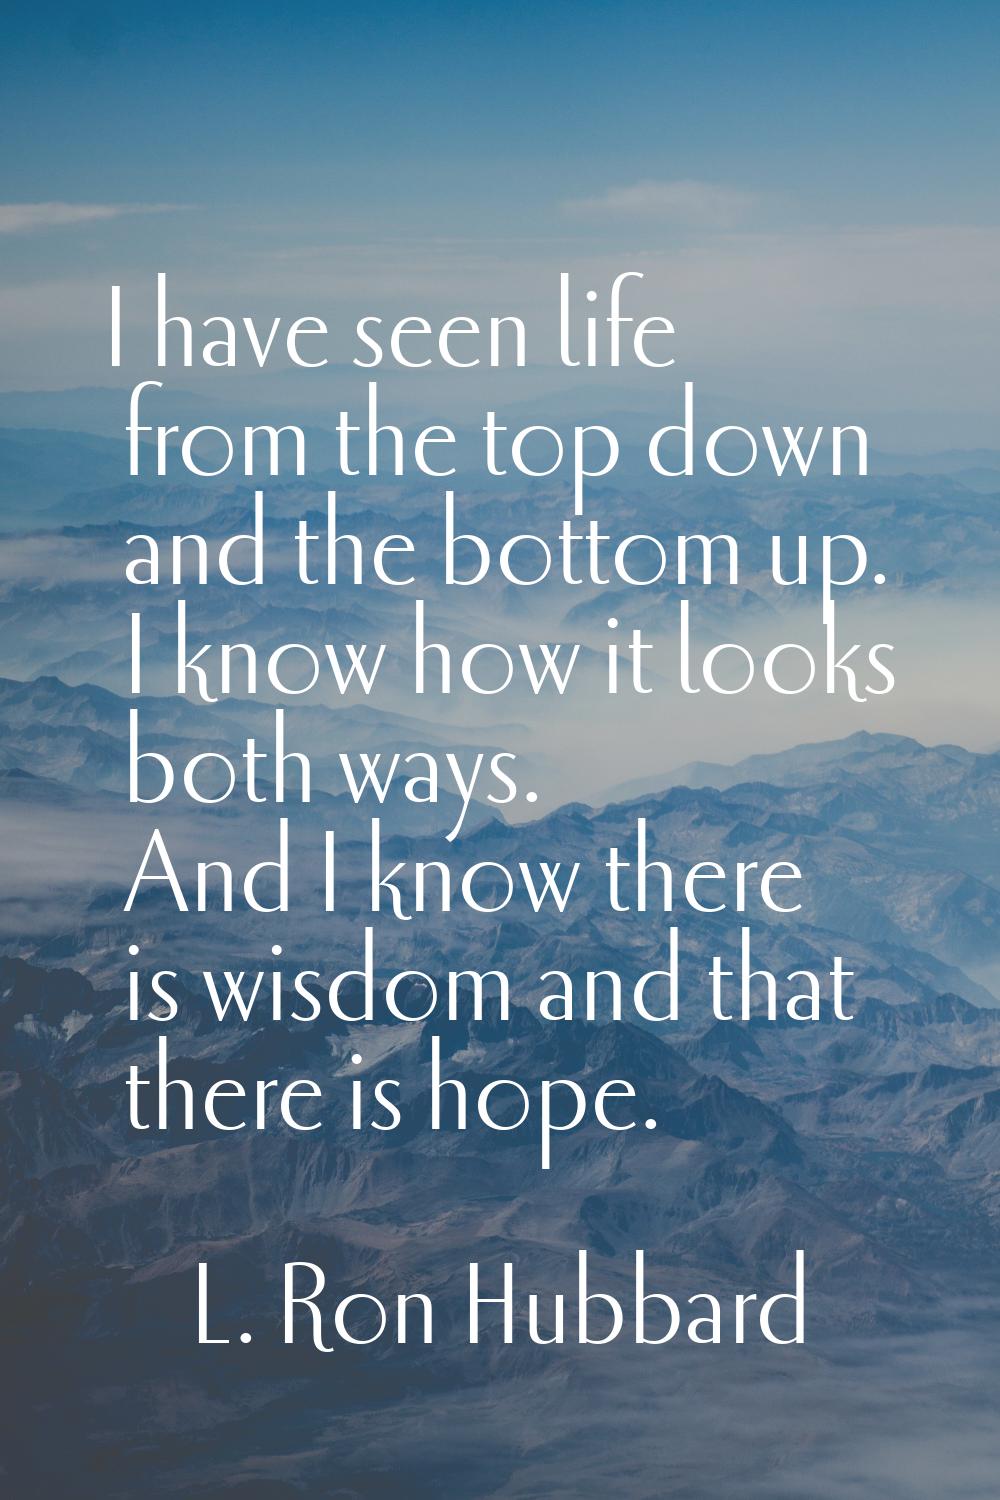 I have seen life from the top down and the bottom up. I know how it looks both ways. And I know the